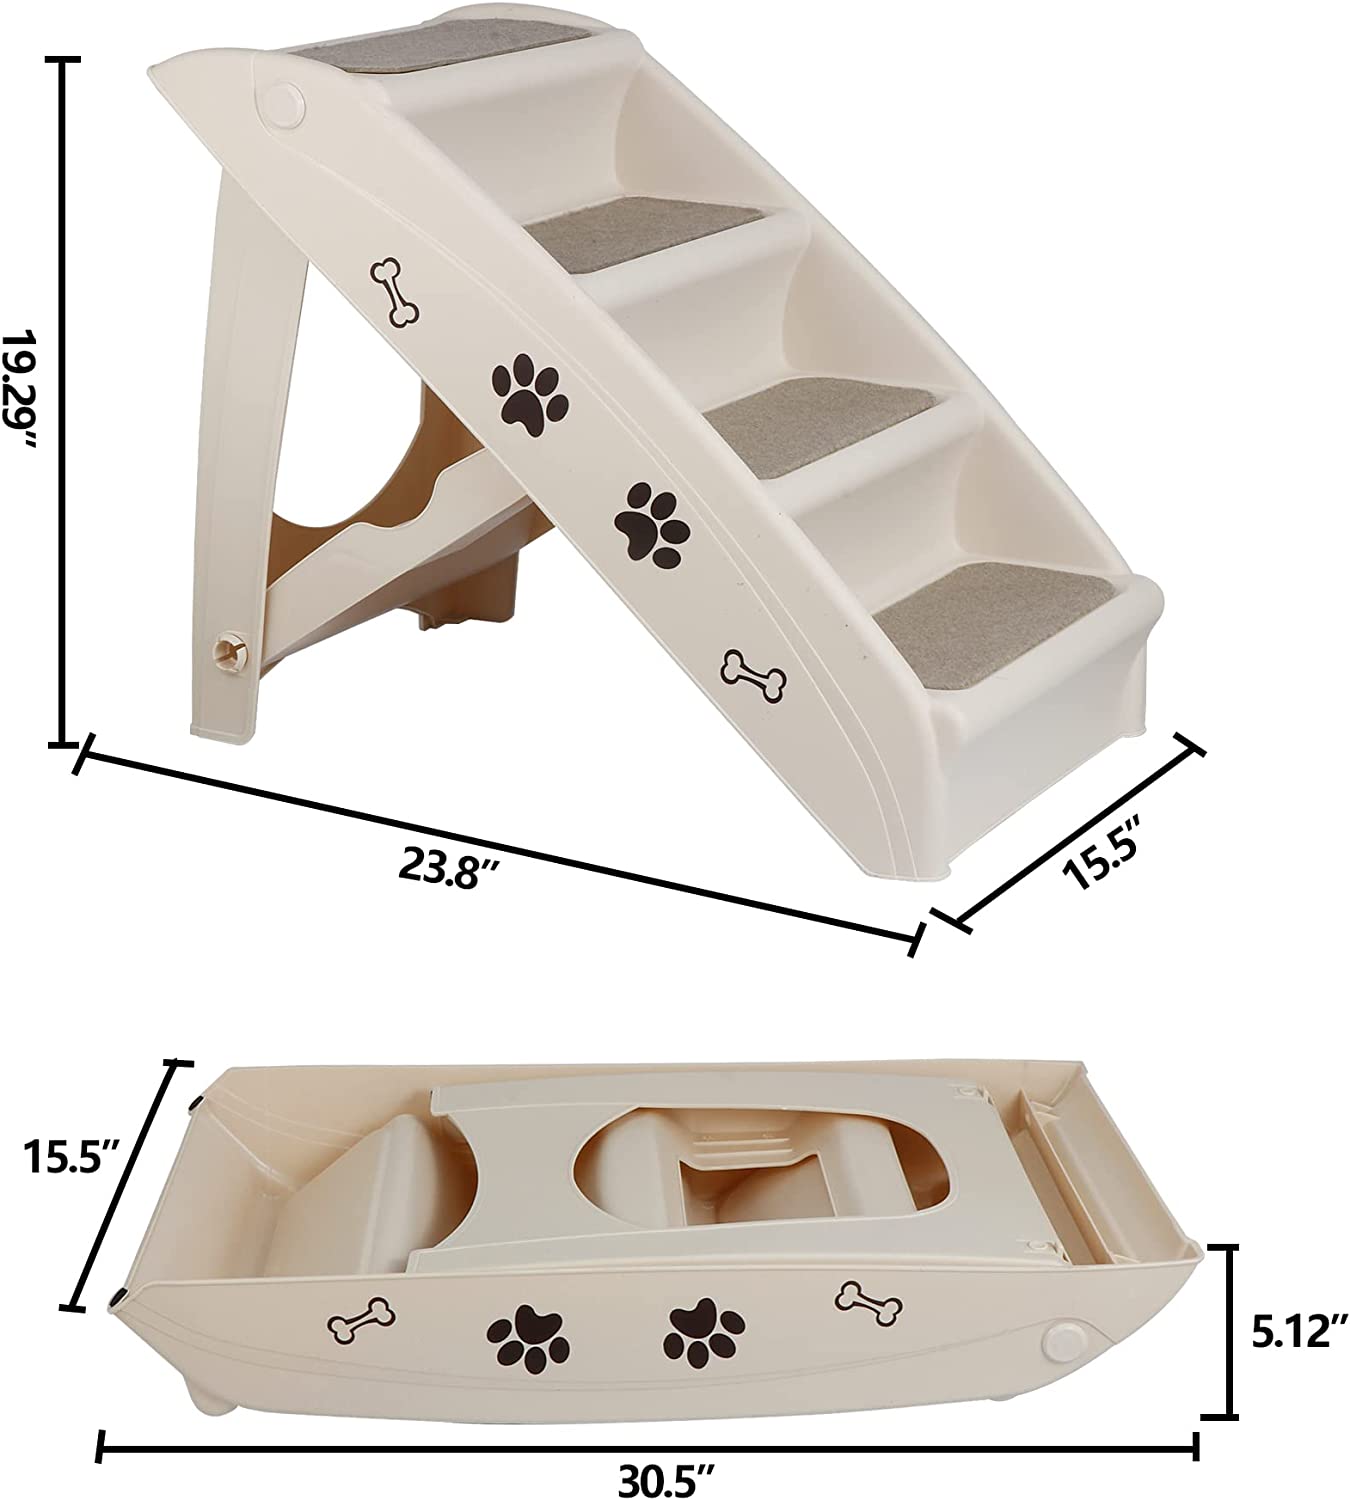 Foldable Pet Dog Stairs/Steps for Small Pet Dog/Cat, Safe and Durable Pet Ramp Stairs with Non-Slip Pads, for High Beds, Sofa, Car